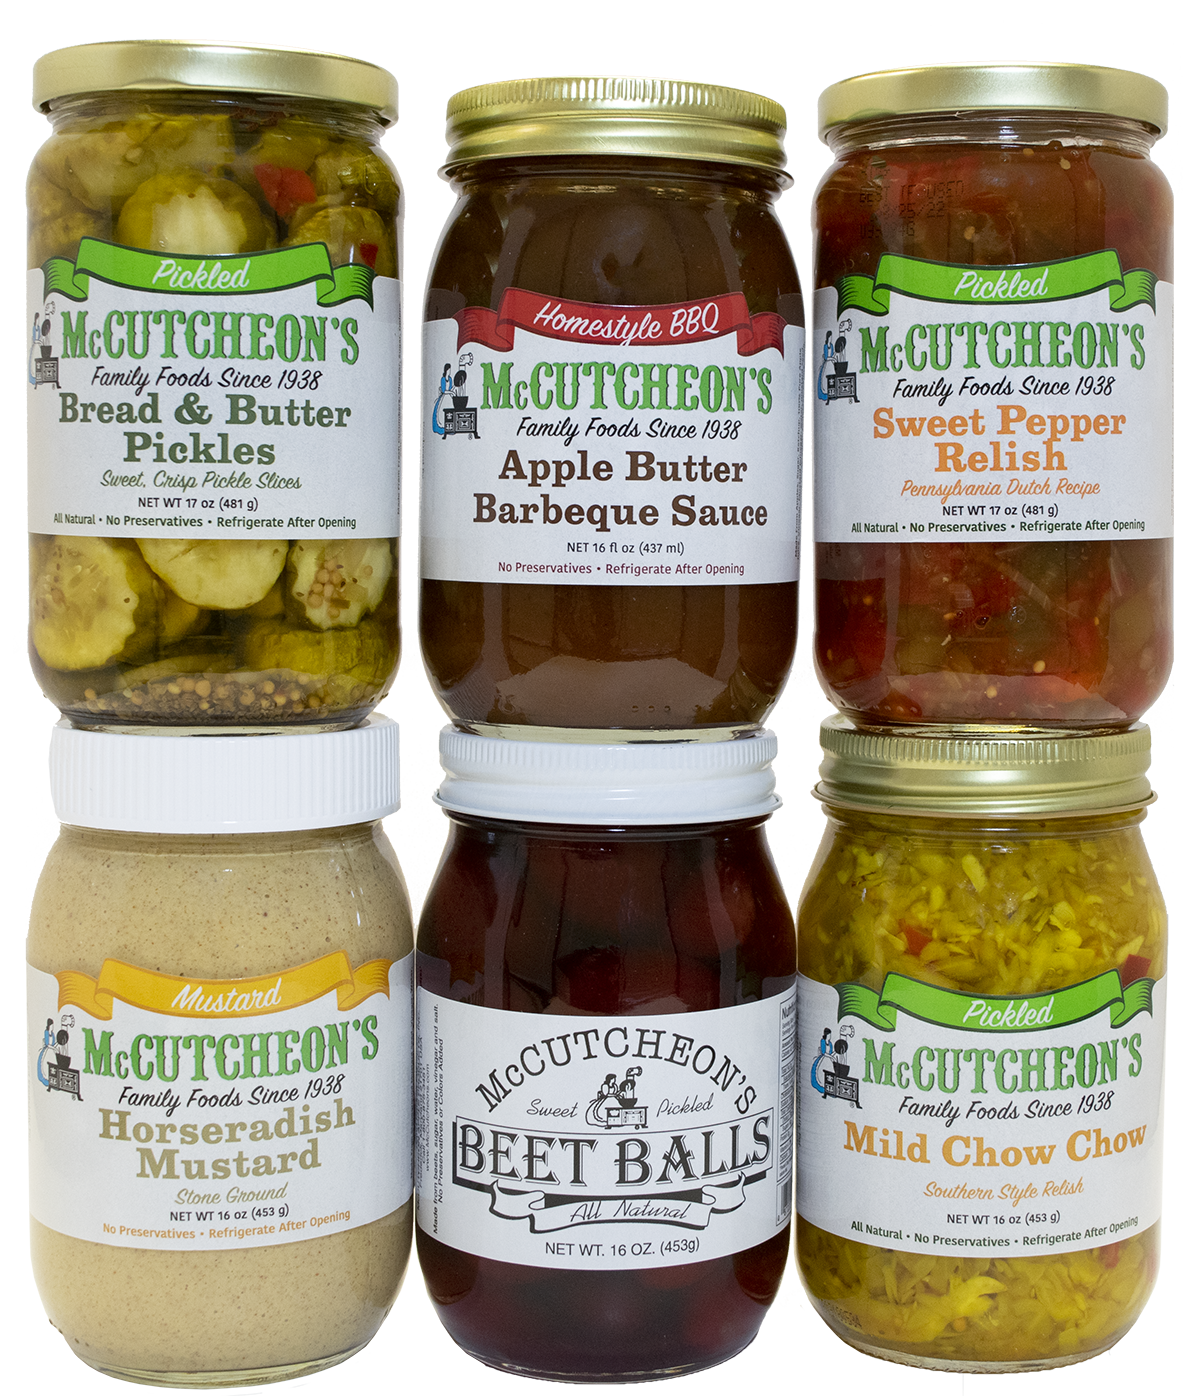 McCutcheon's favorite picnic sampler including jars of Bread & Butter Pickles, Apple Butter Barbeque Sauce, Sweet Pepper Relish, Horseradish Mustard, Beet Balls, and Mild Chow Chow